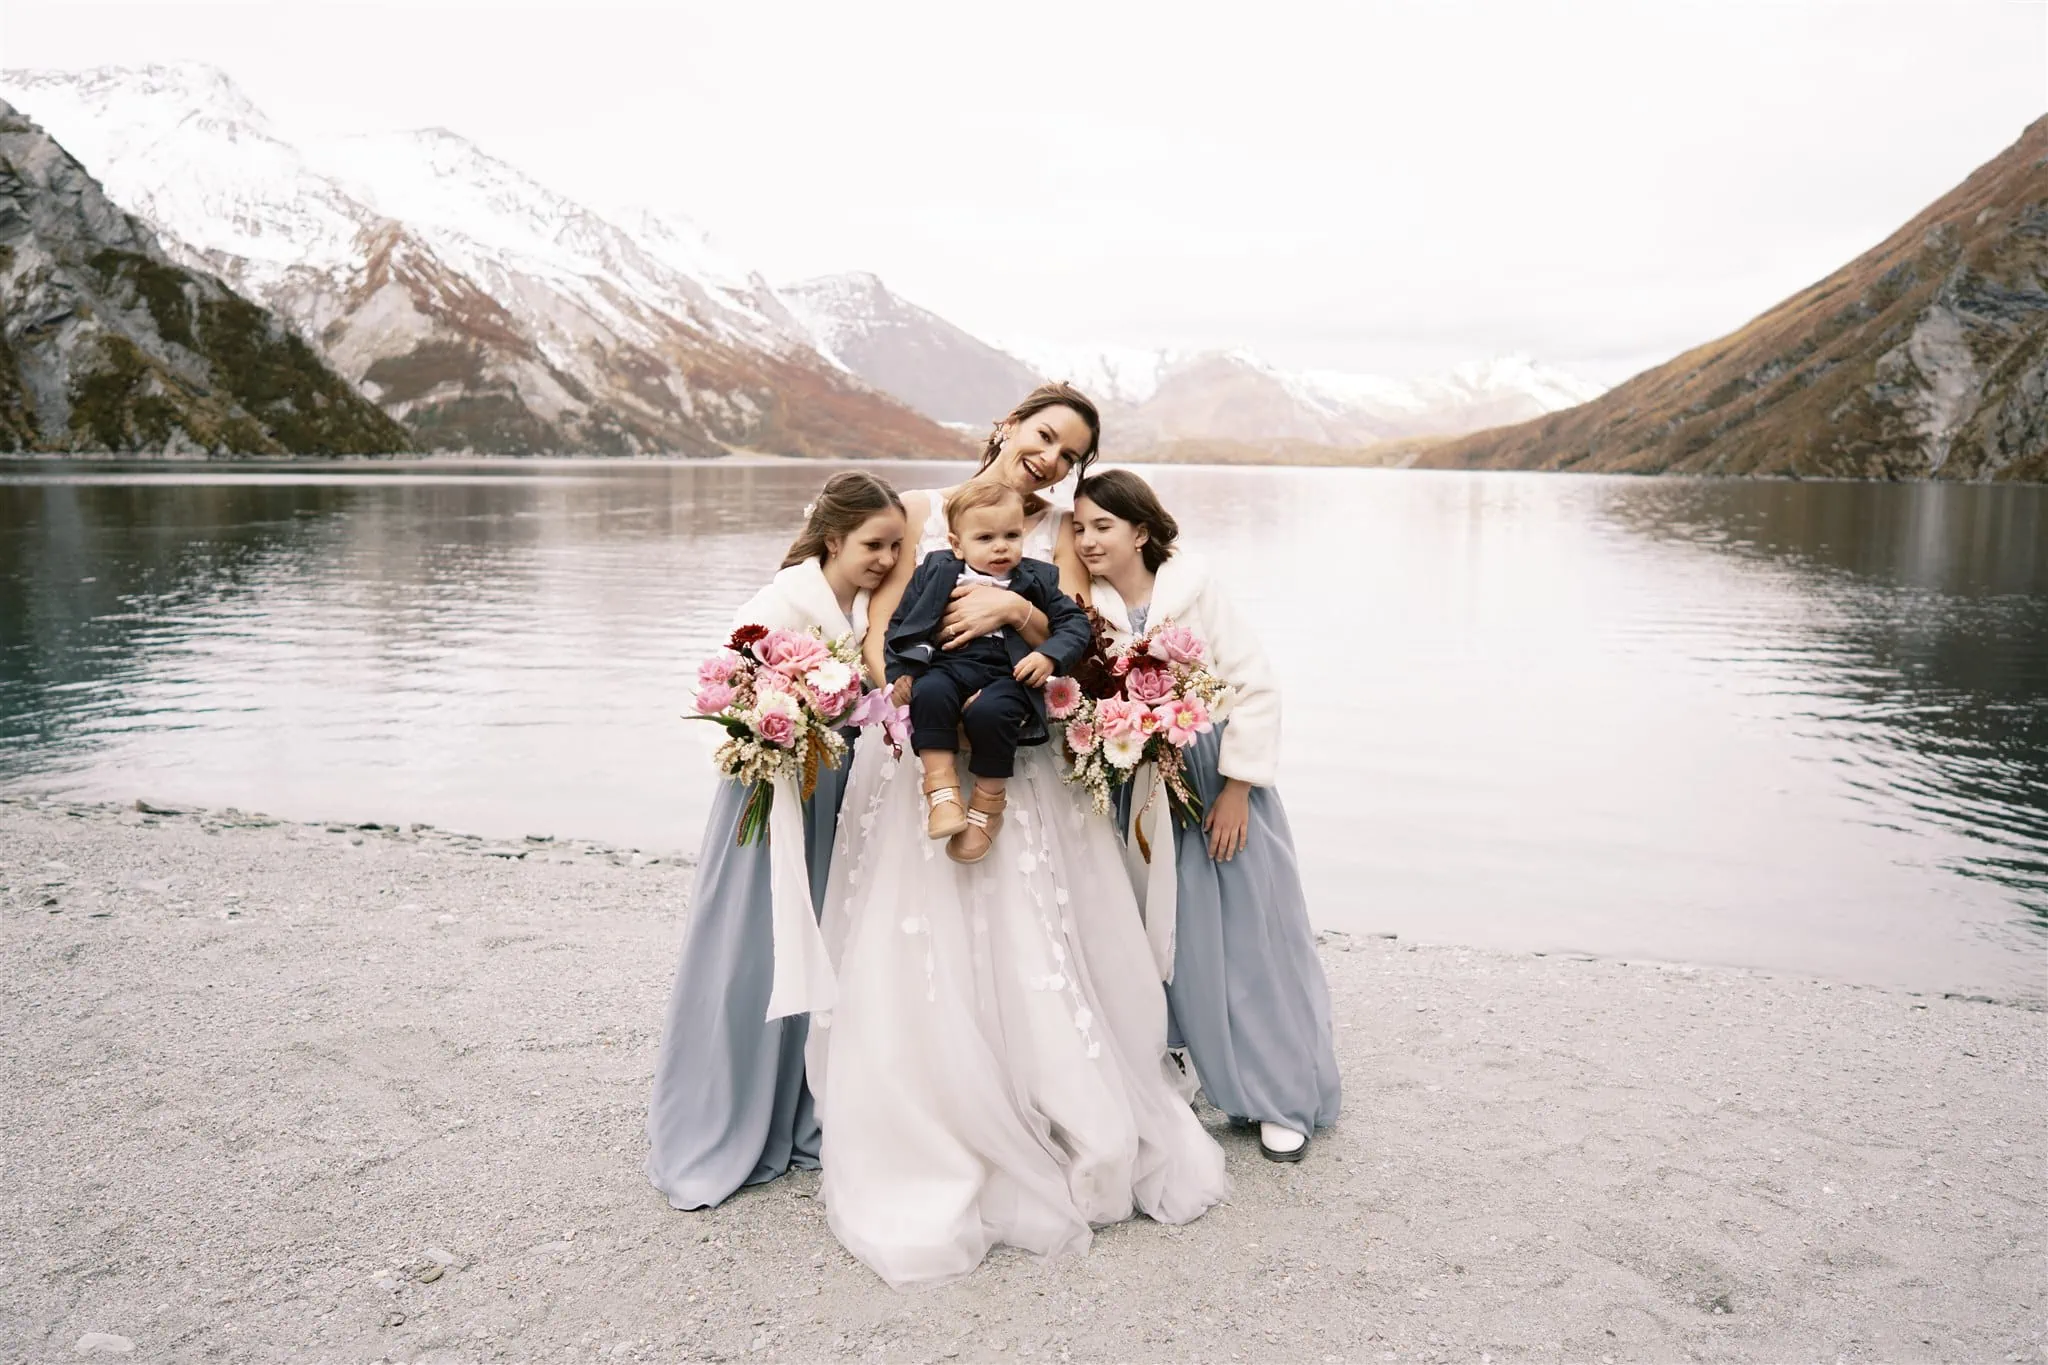 Queenstown New Zealand Elopement Wedding Photographer - Bridesmaids holding a baby in front of a beautiful lake with mountains in the background in Queenstown.